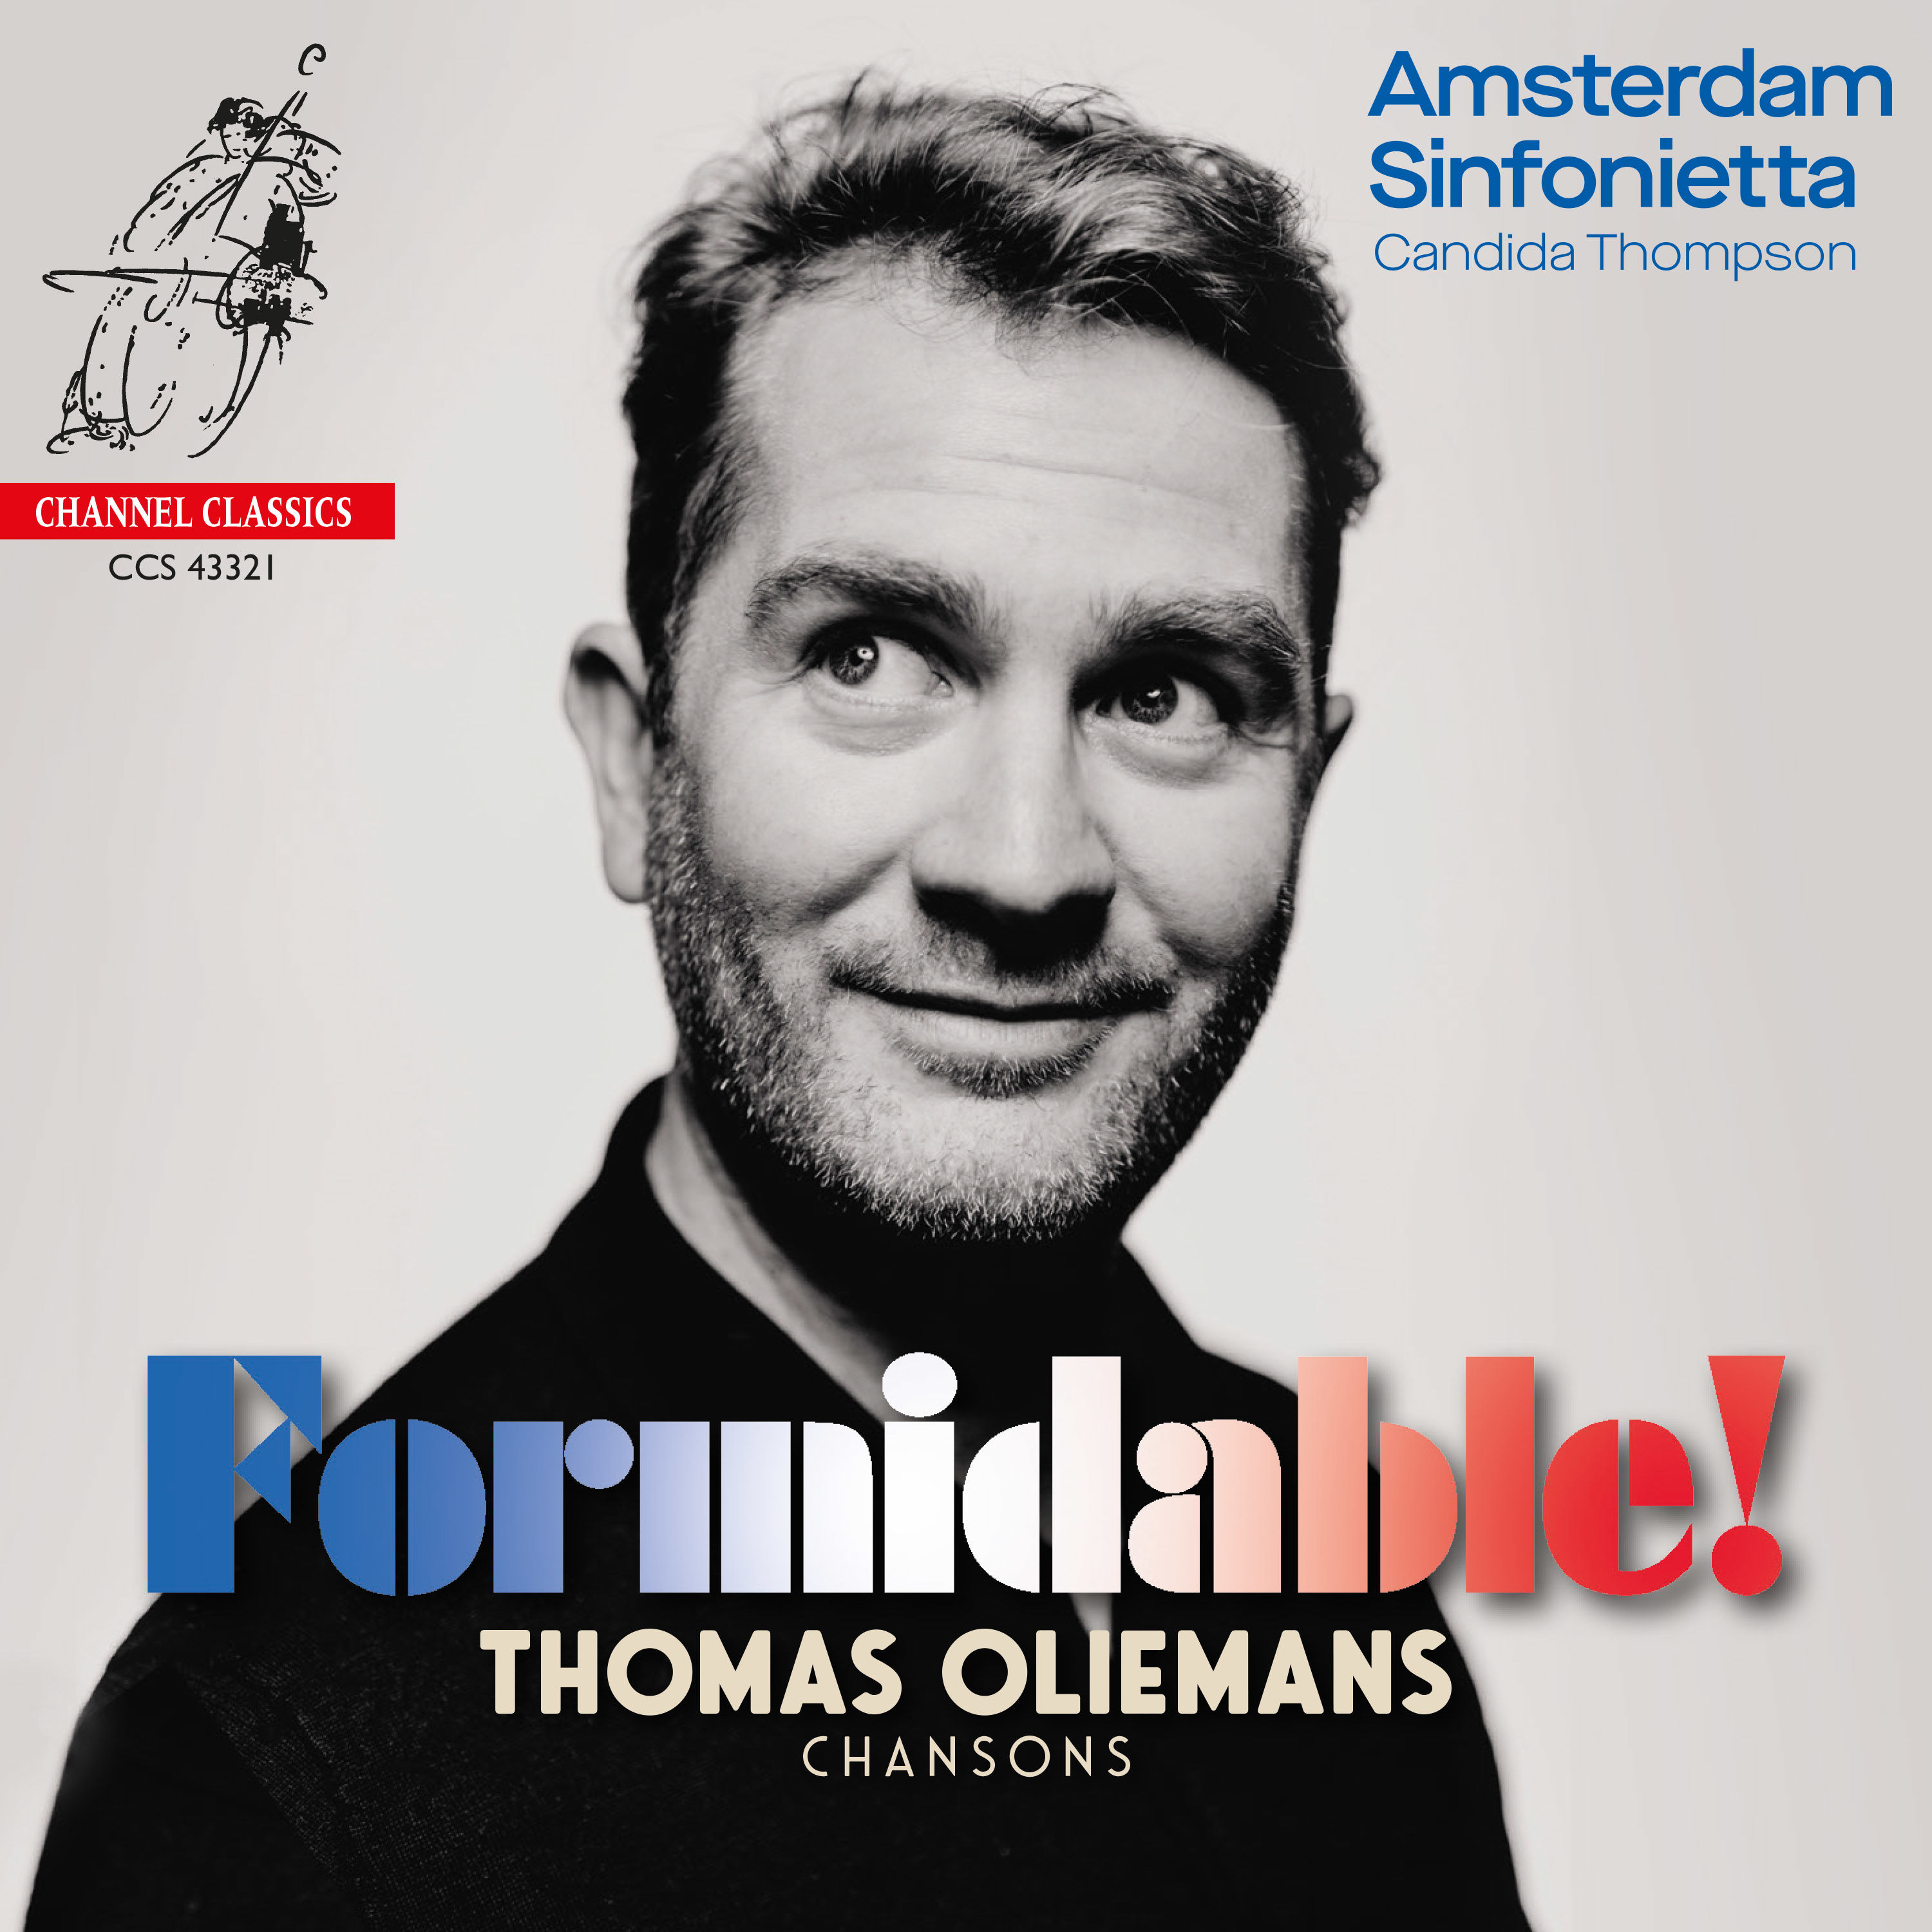 Thomas Oliemans – Formidable! (French Chansons)